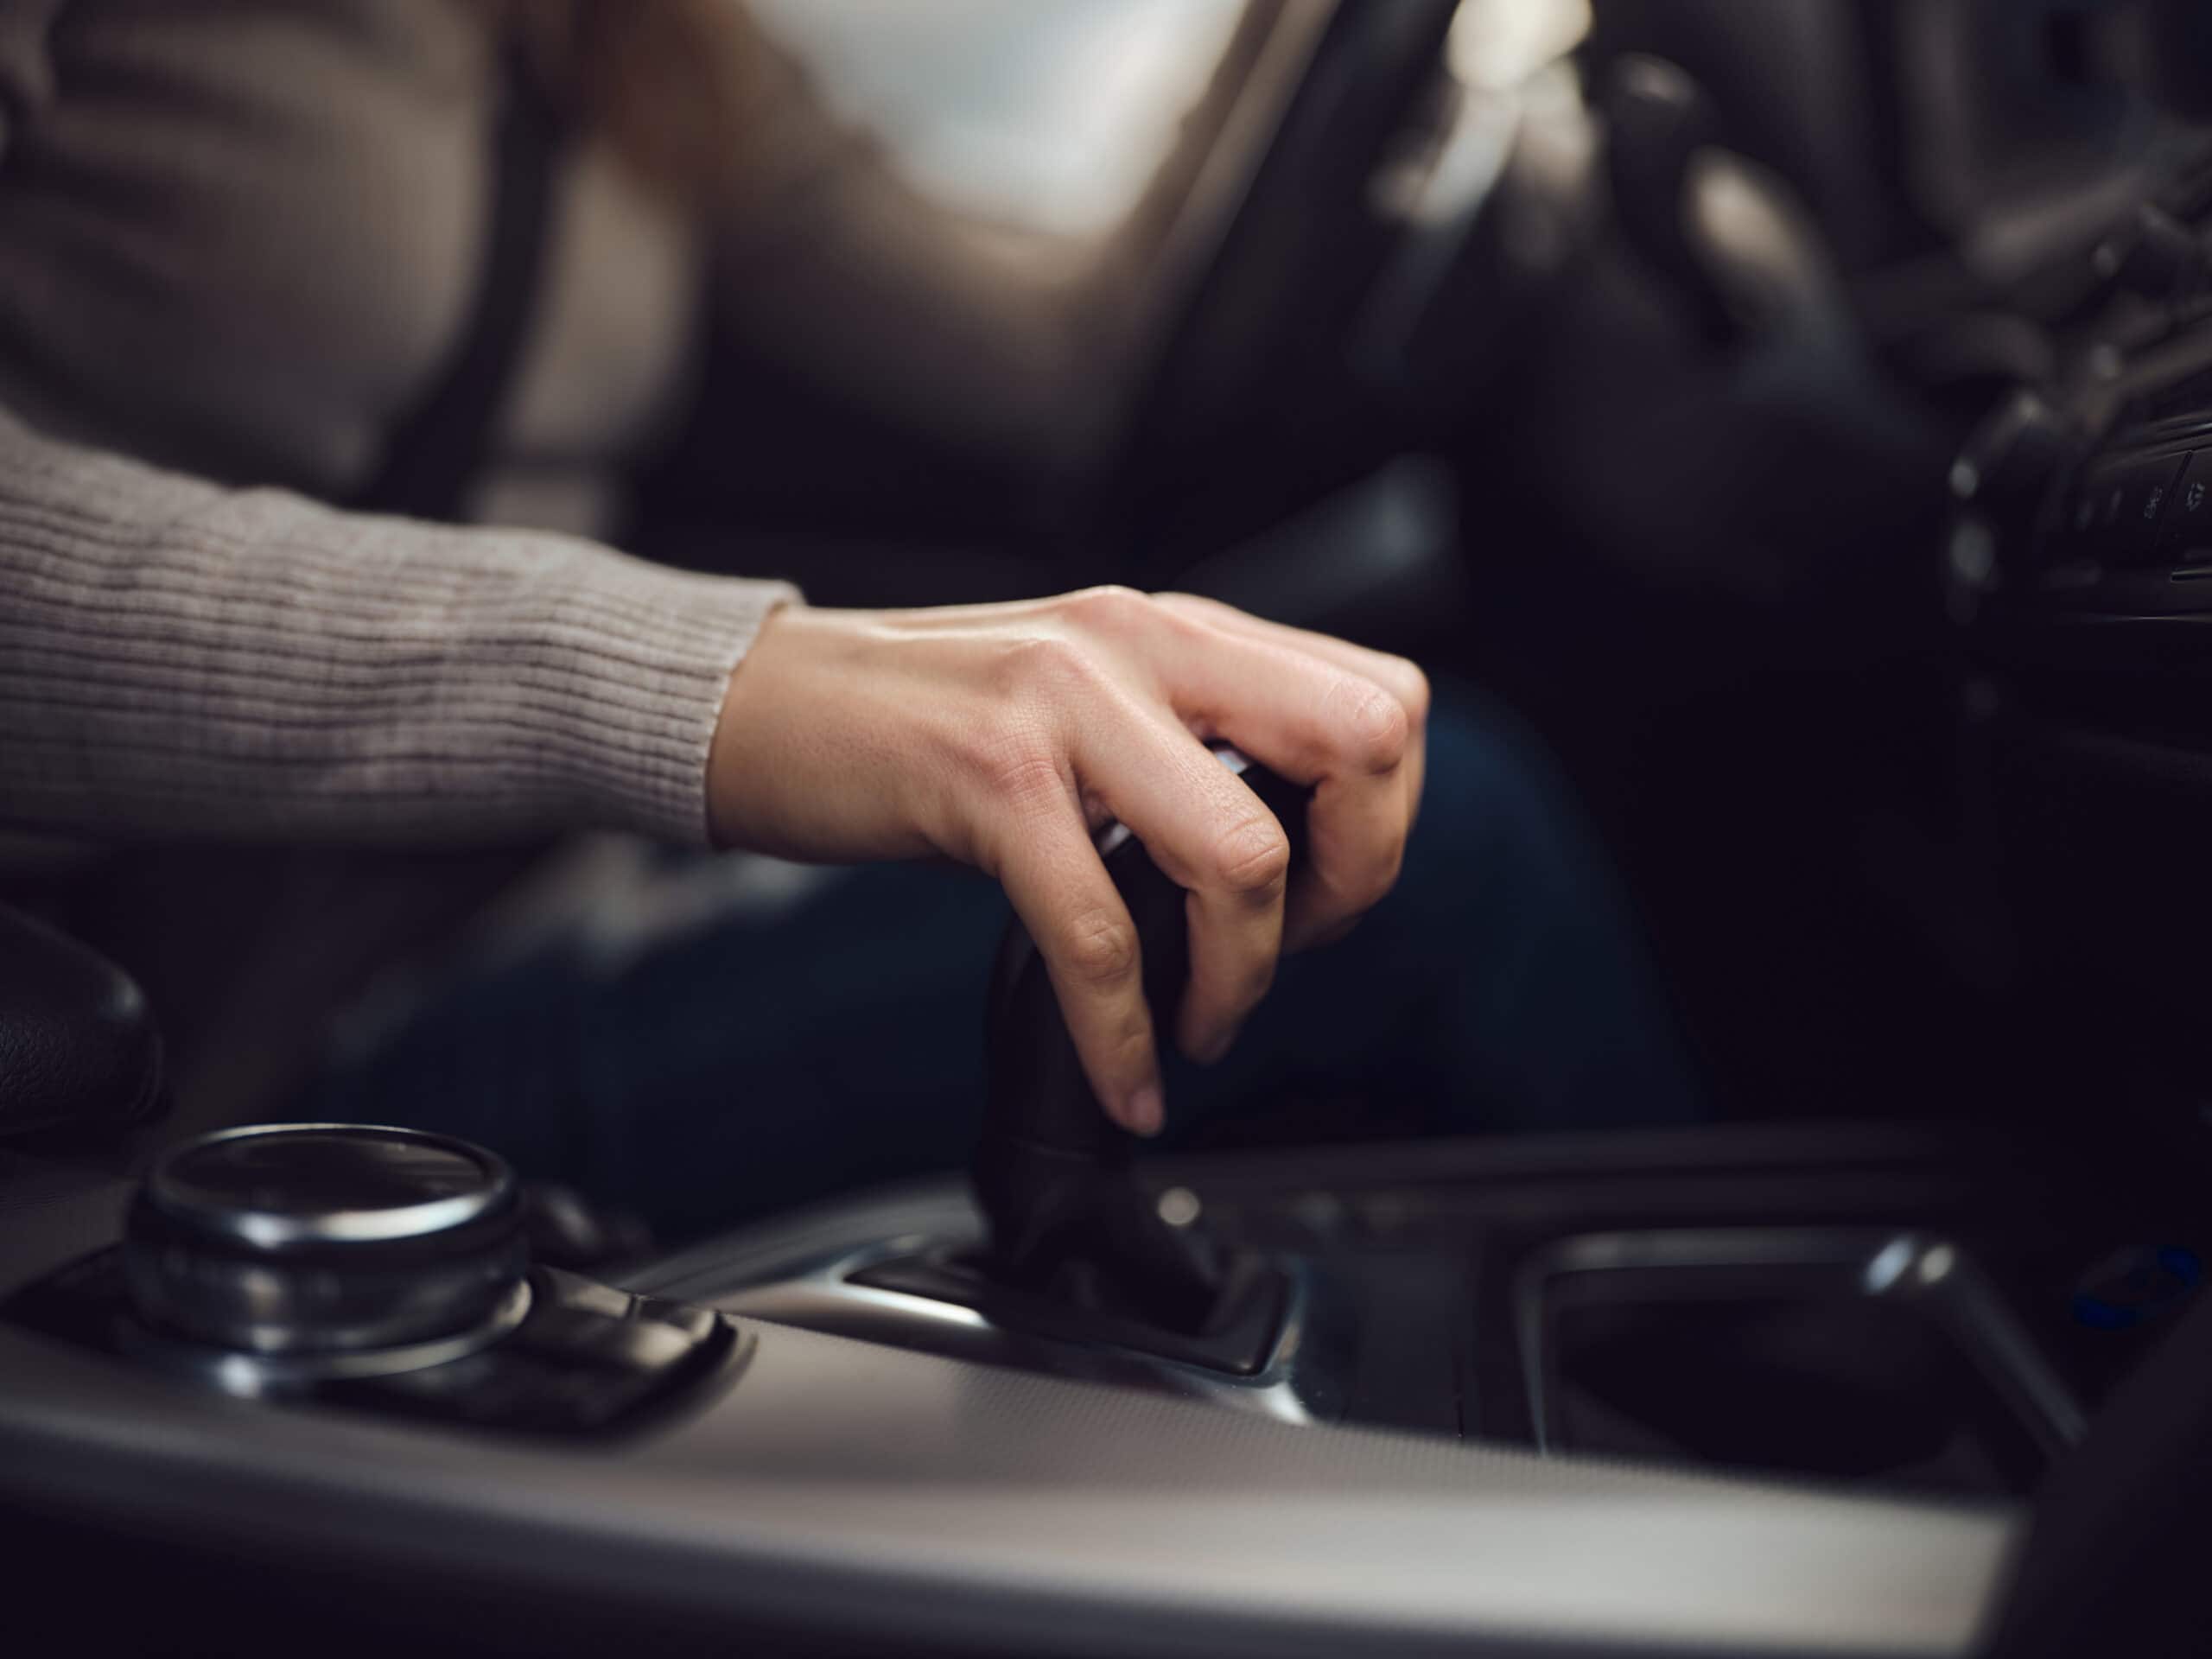 Manual vs Automatic Transmission: A Driver’s Perspective